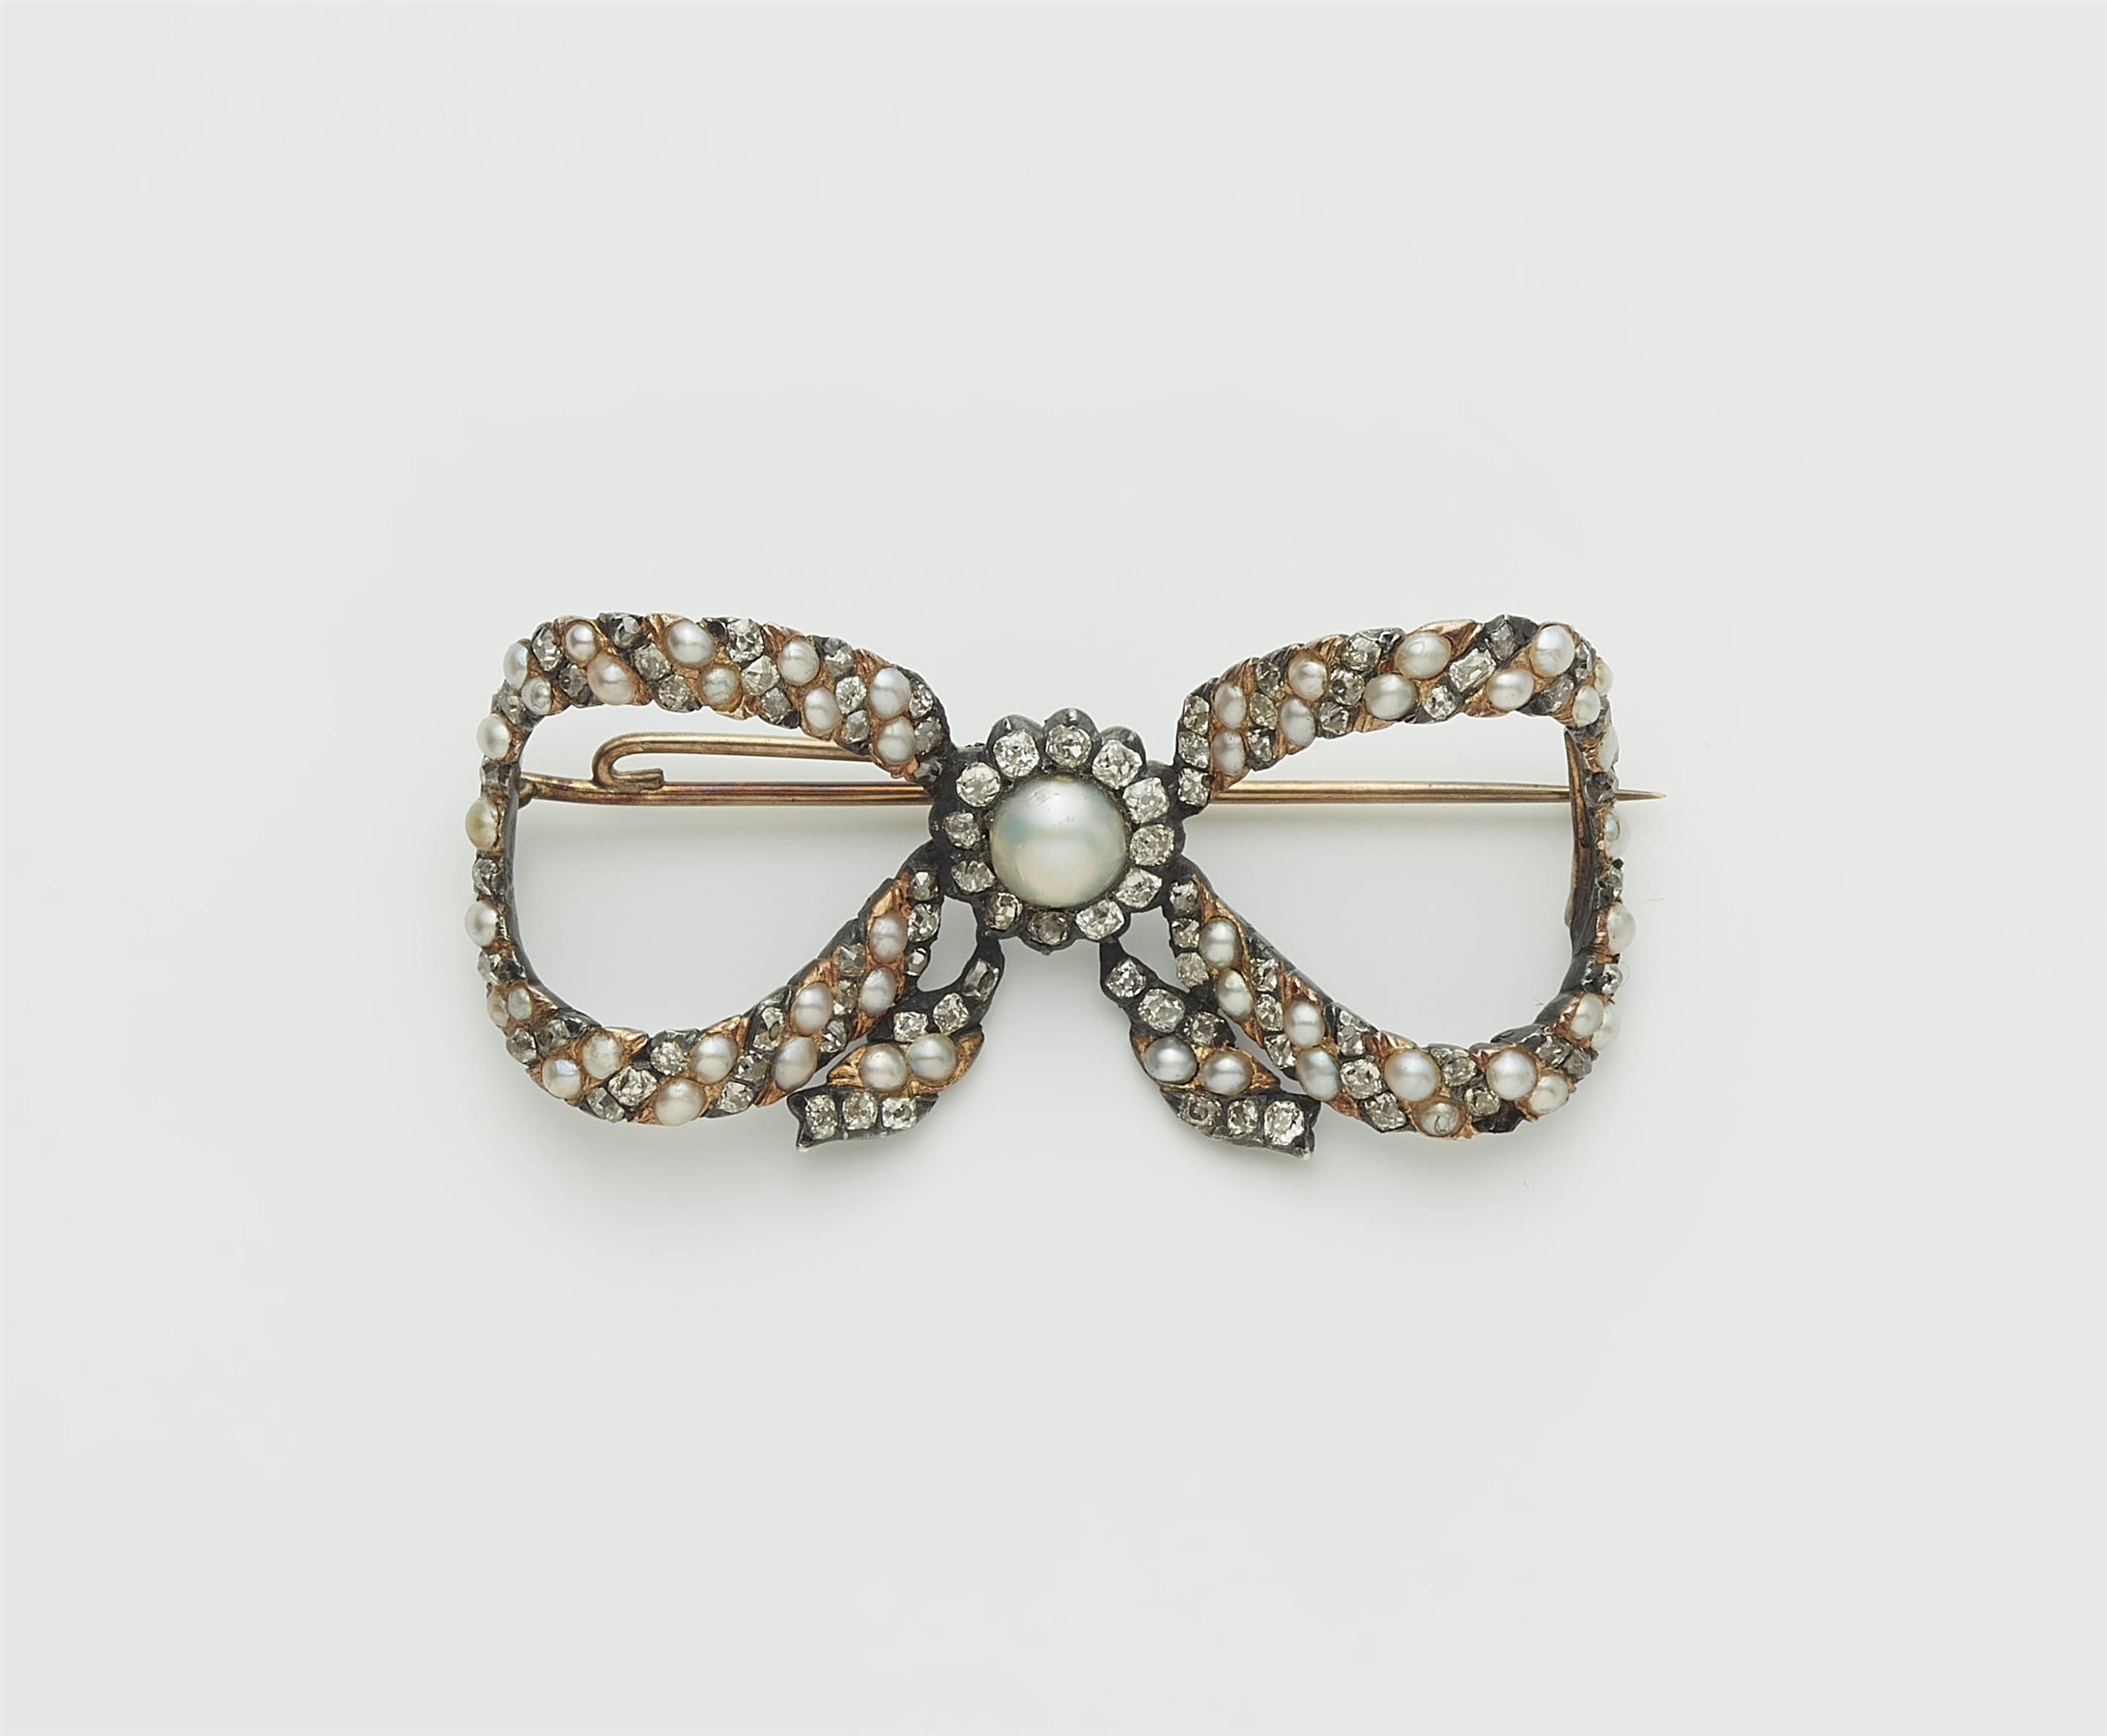 An early 19th century silver gilt pearl and cushion-cut diamond bow brooch with 14k gold mount.